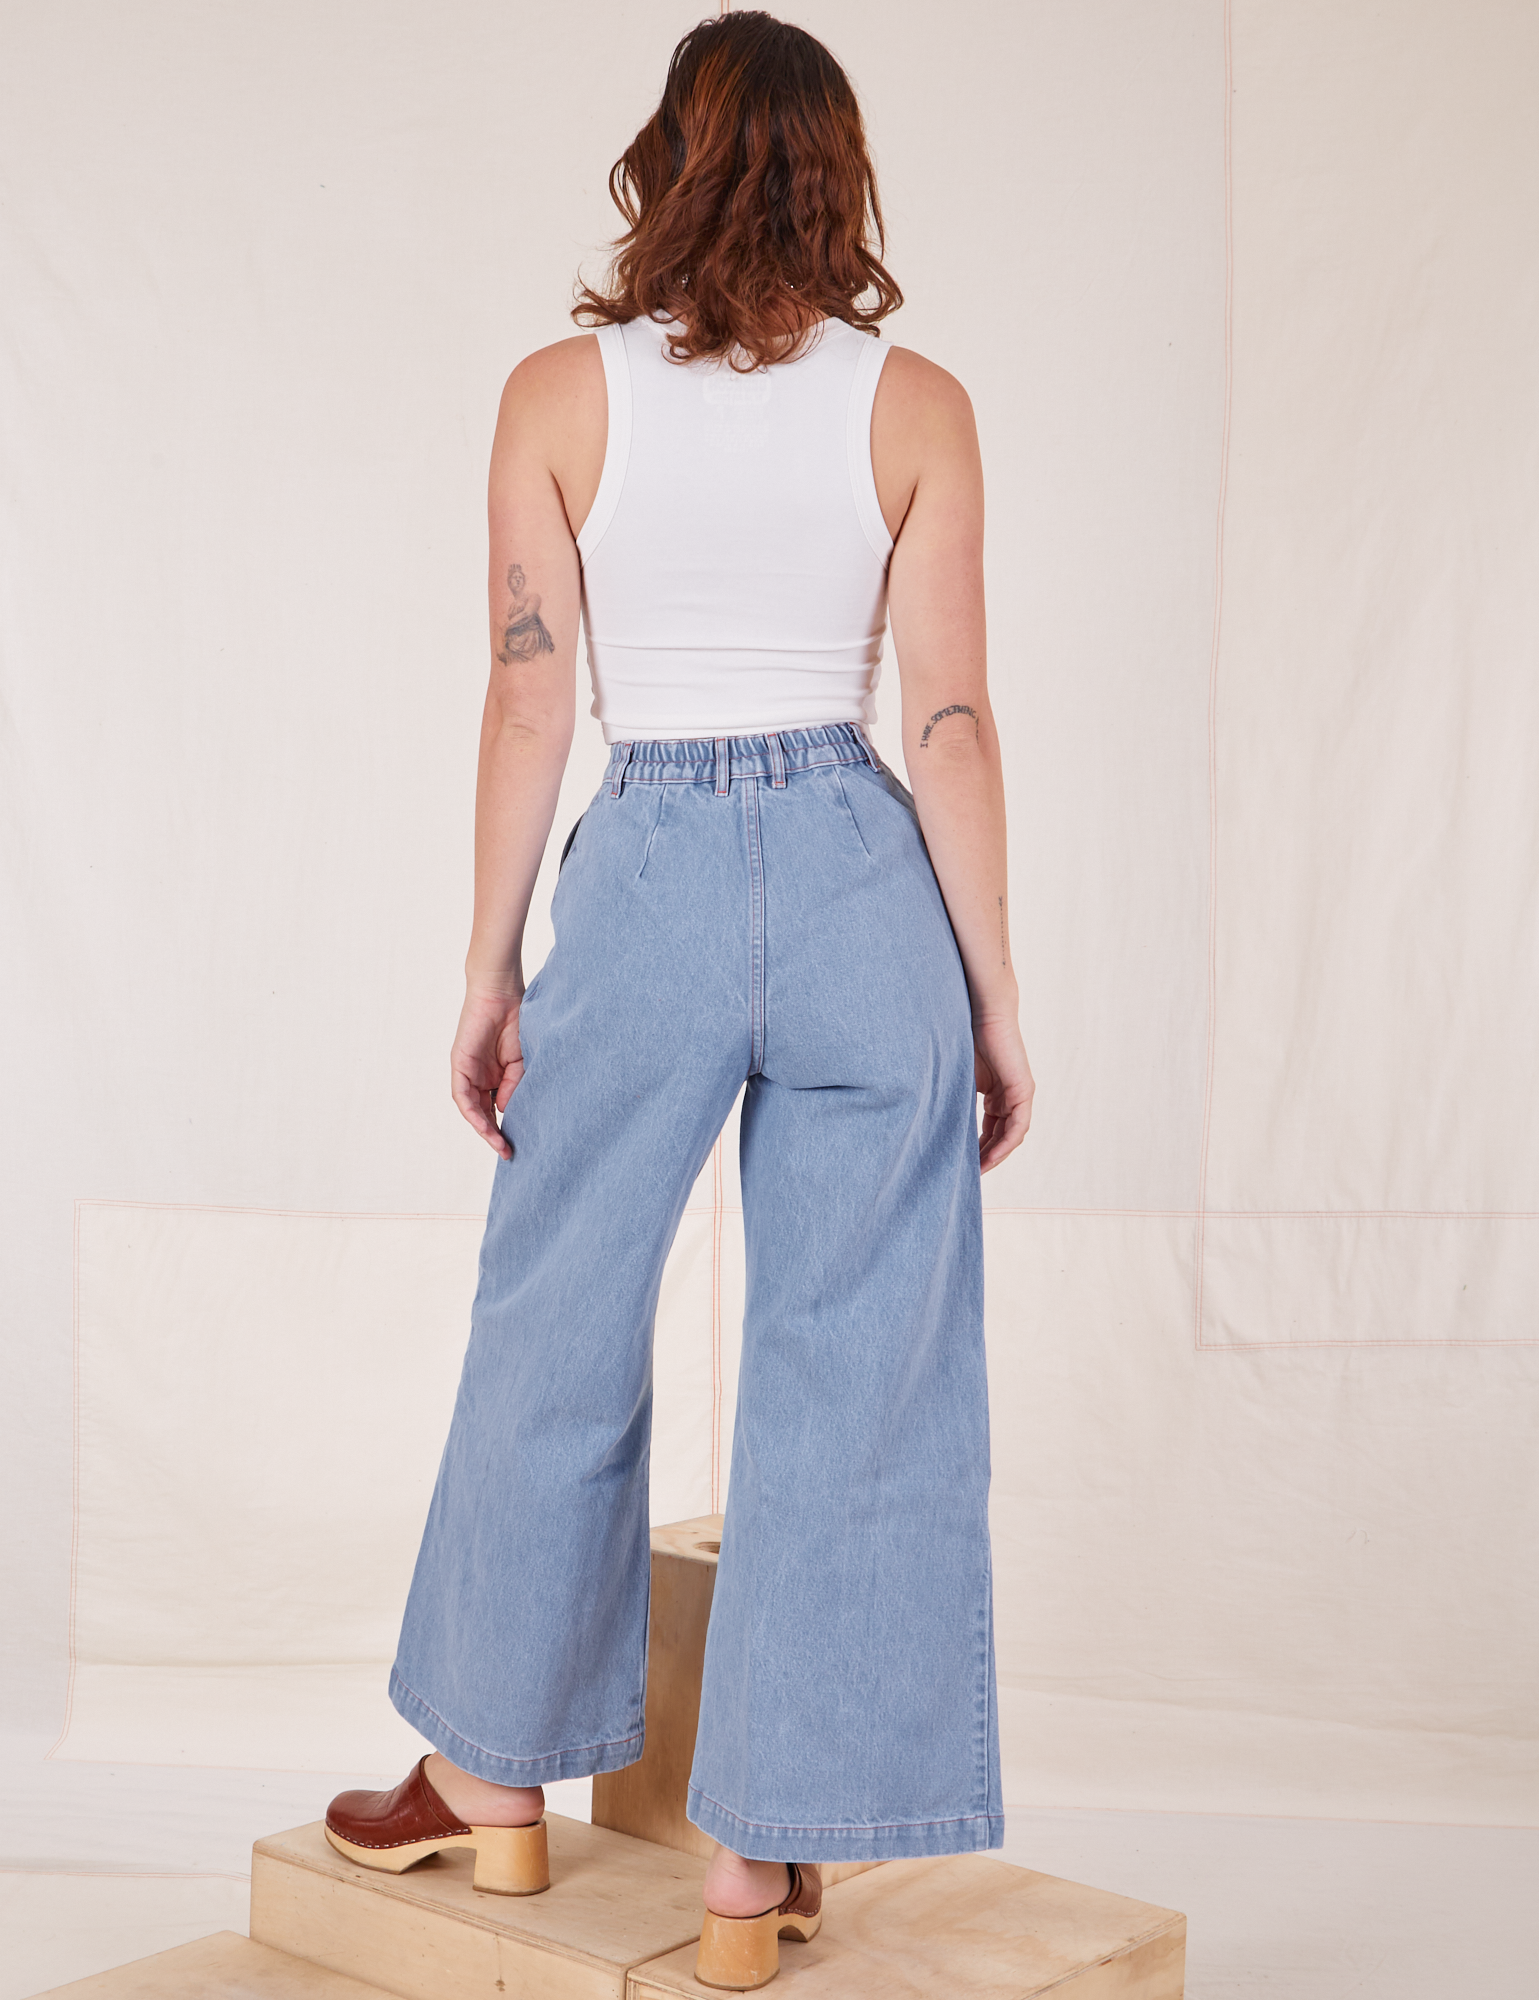 Back view of Indigo Wide Leg Trousers in Light Wash and vintage off-white Cropped Tank Top on Alex